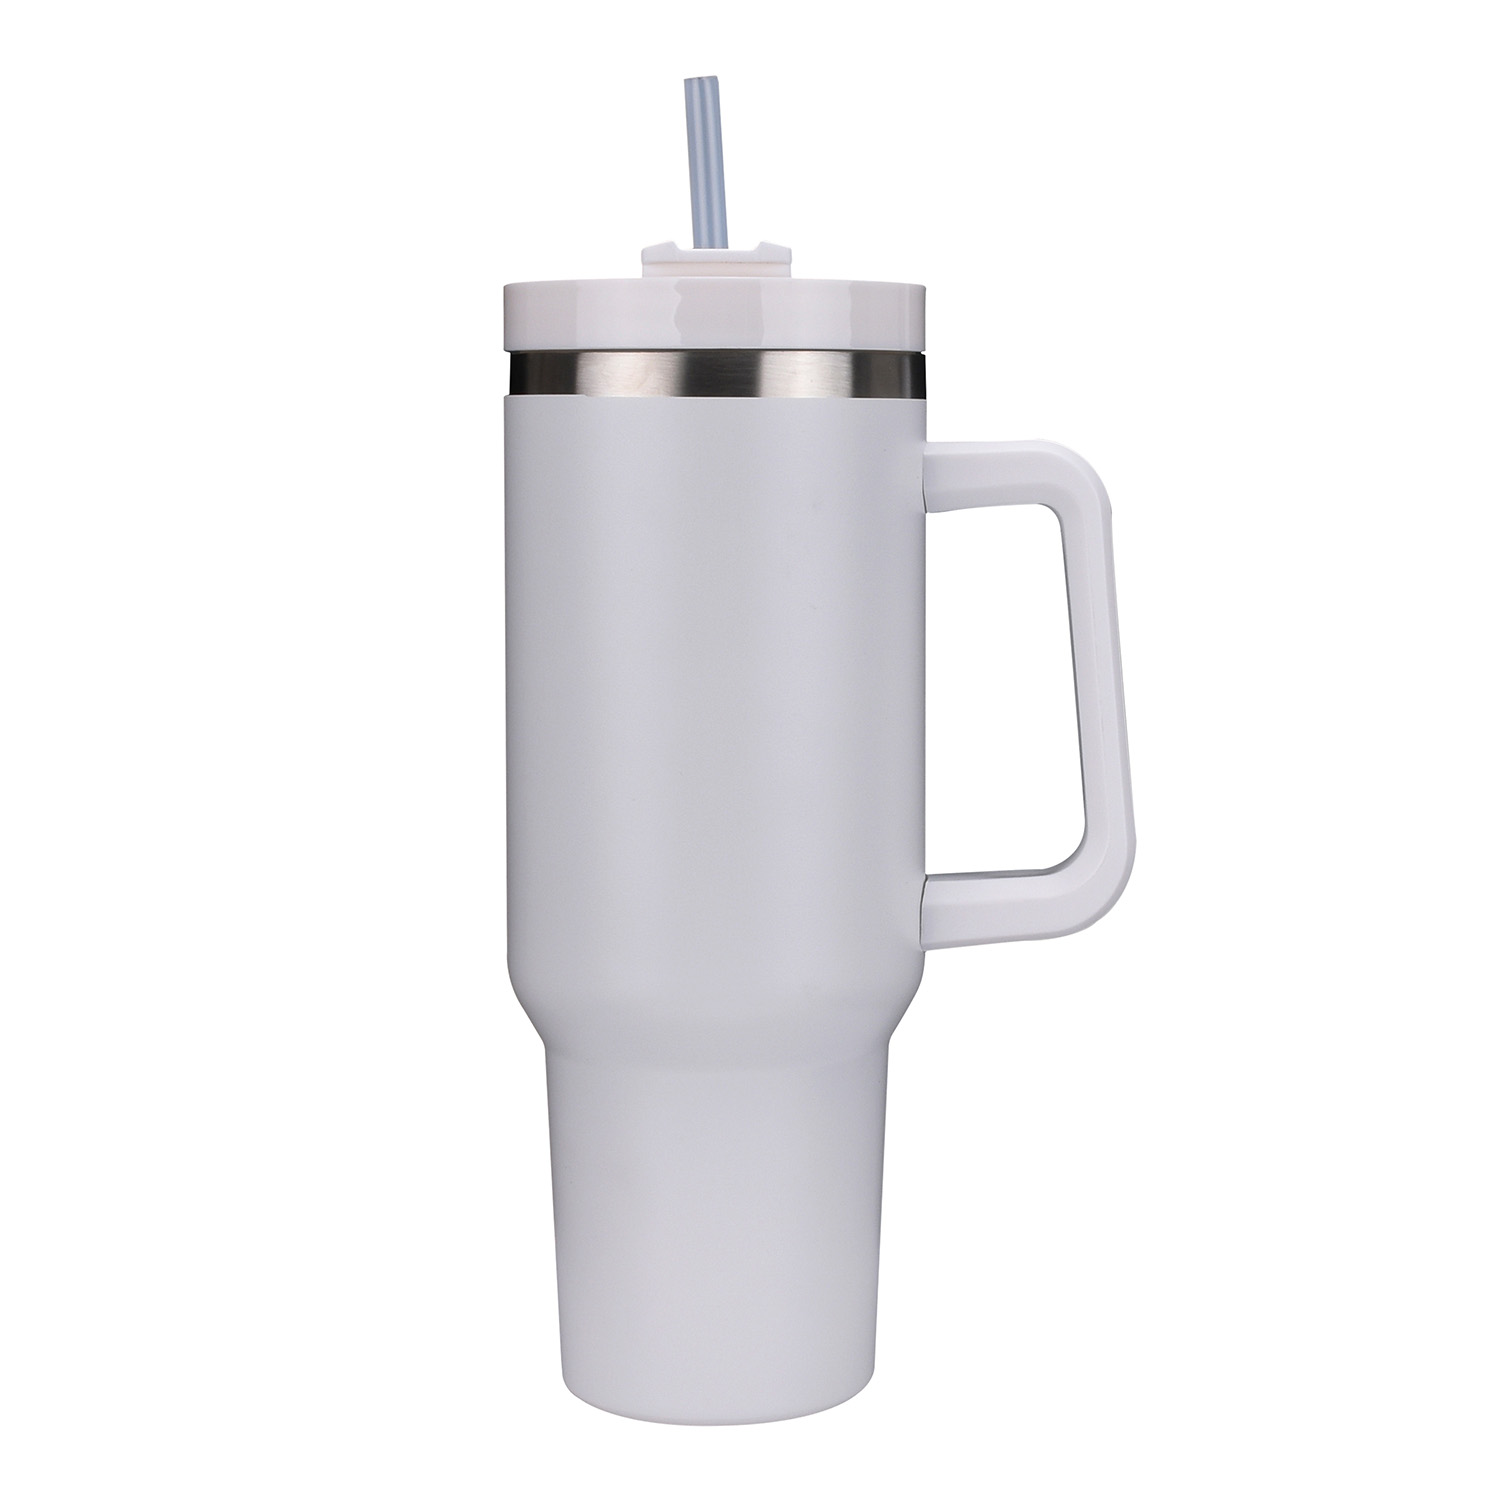 https://www.waterbottle.tech/wp-content/uploads/2023/04/Stanley-Quencher-H2.0-Custom-Design-40oz-tumbler-with-handle-straw-lid-s214098-4.jpg